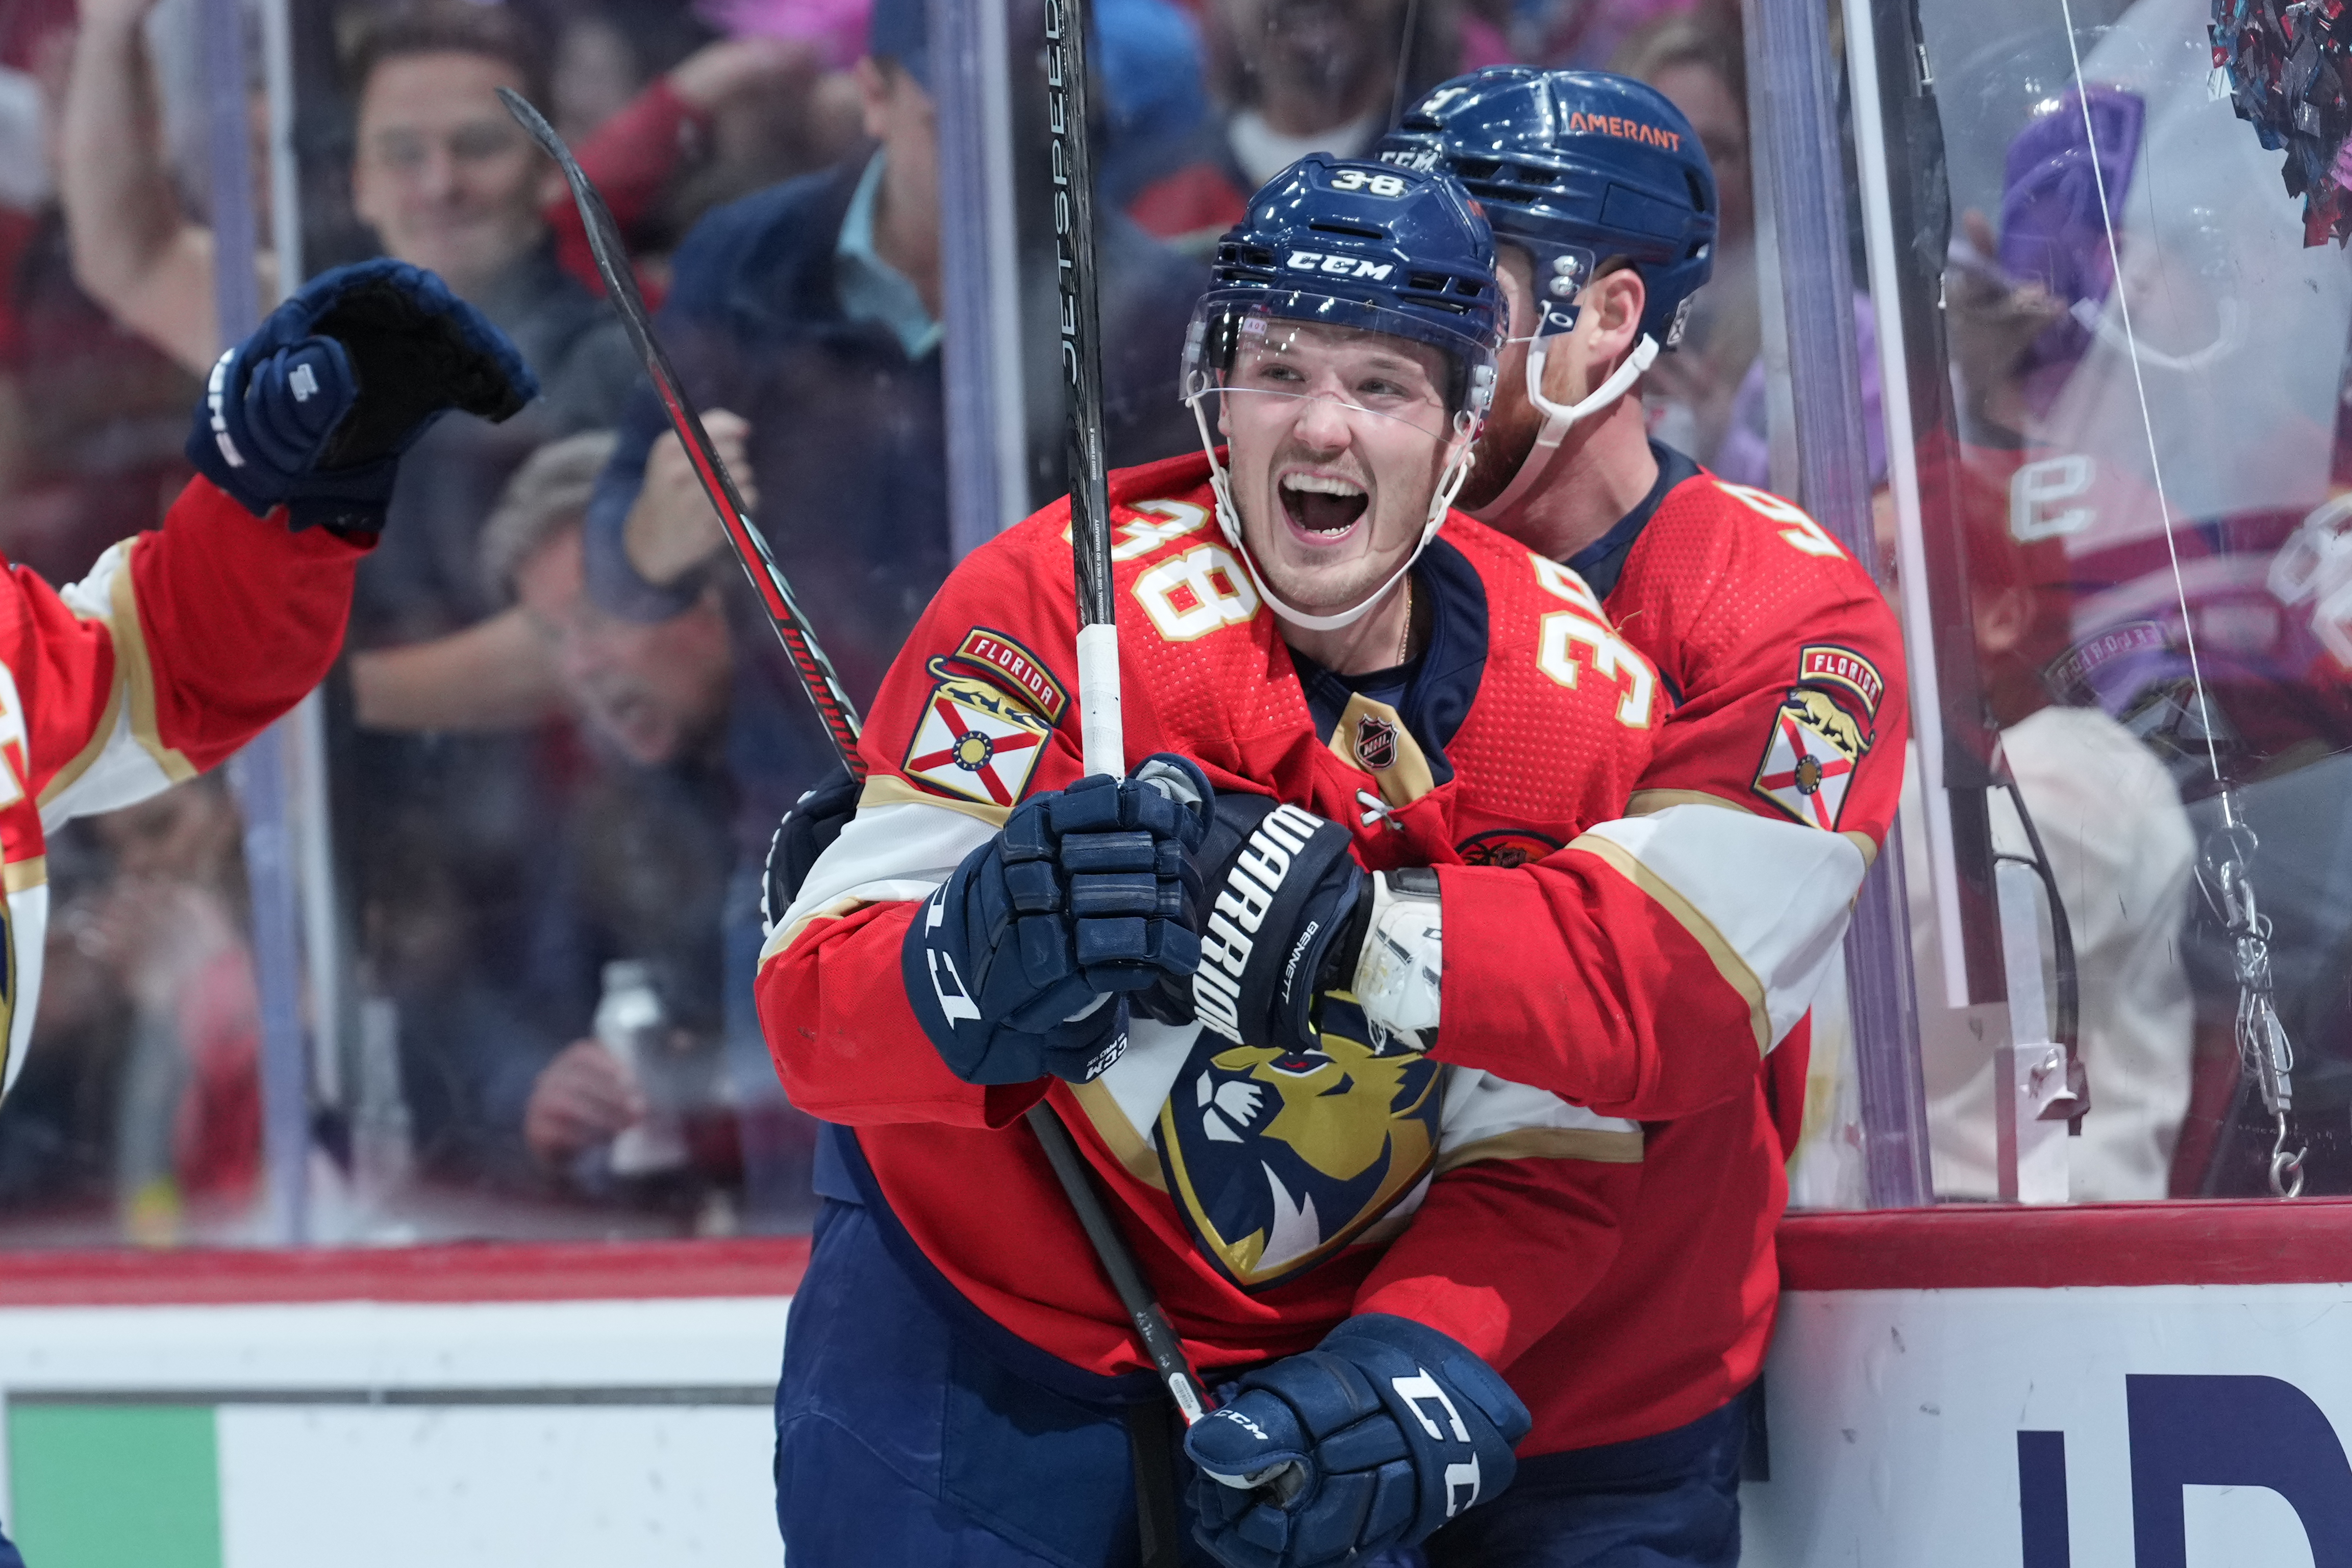 Florida Panthers left wing Rudolfs Balcers (38) celebrates his goal with Florida Panthers center Sam Bennett (9) during the game between the Tampa Bay Lightning and the Florida Panthers on Friday, October 21, 2022 at FLA Live Arena in Sunrise, FL.